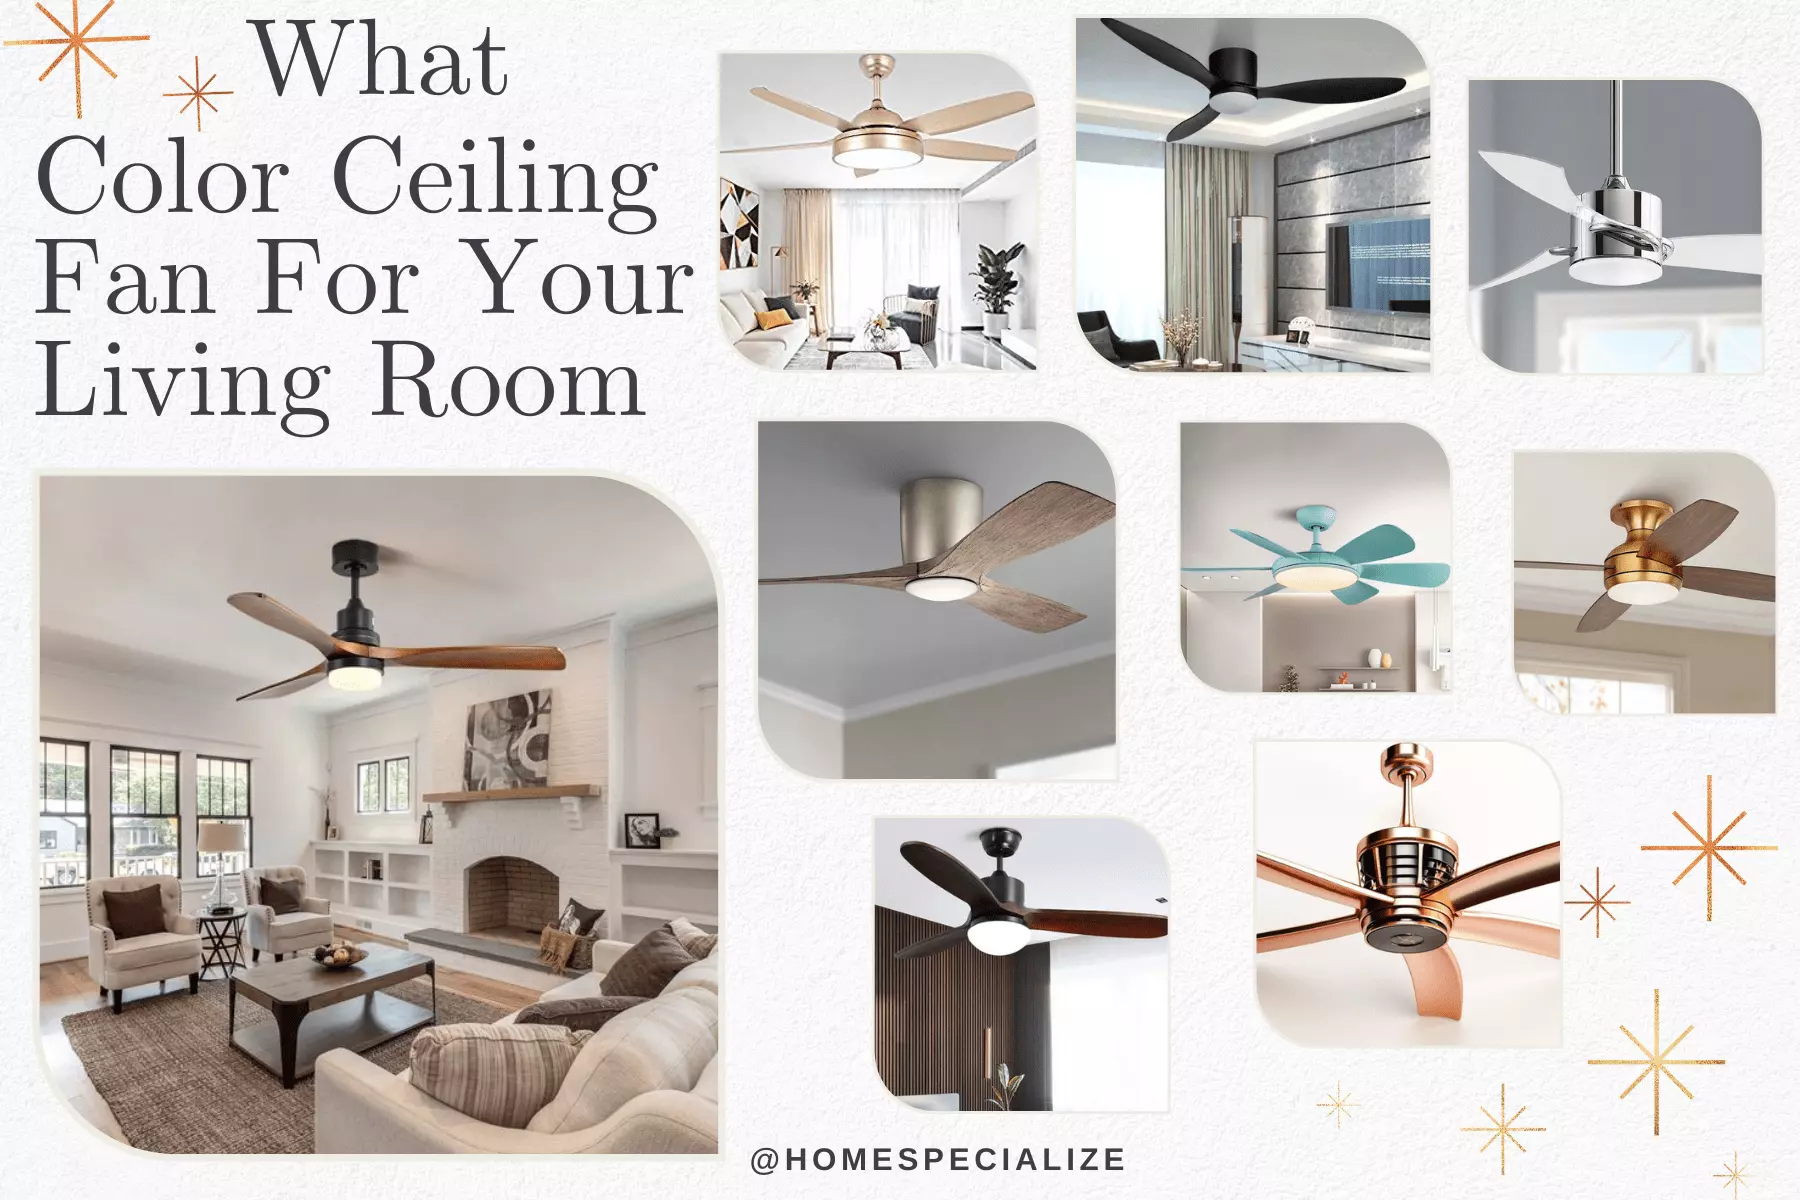 What Color Ceiling Fan For Living Room Creating a Cozy Oasis